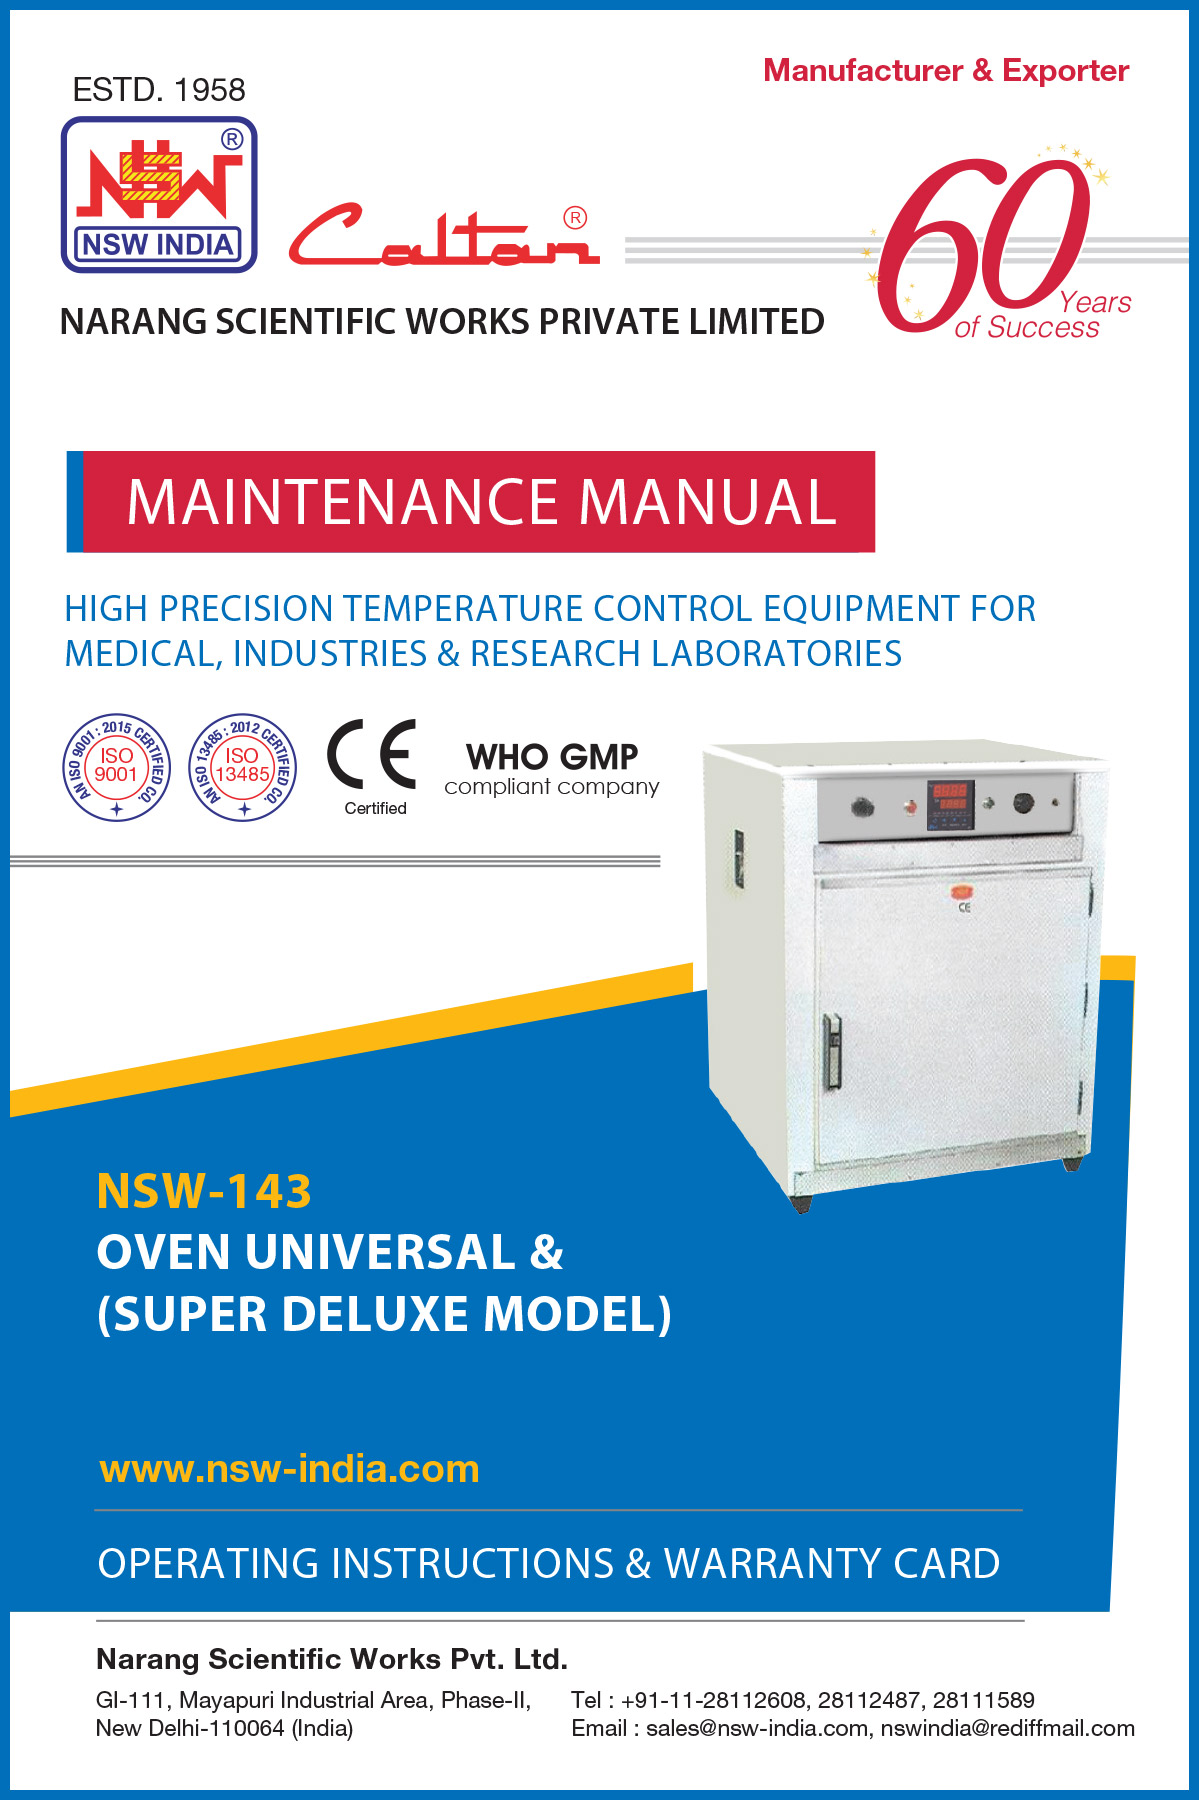 Oven Universal and Super Deluxe Model NSW-143